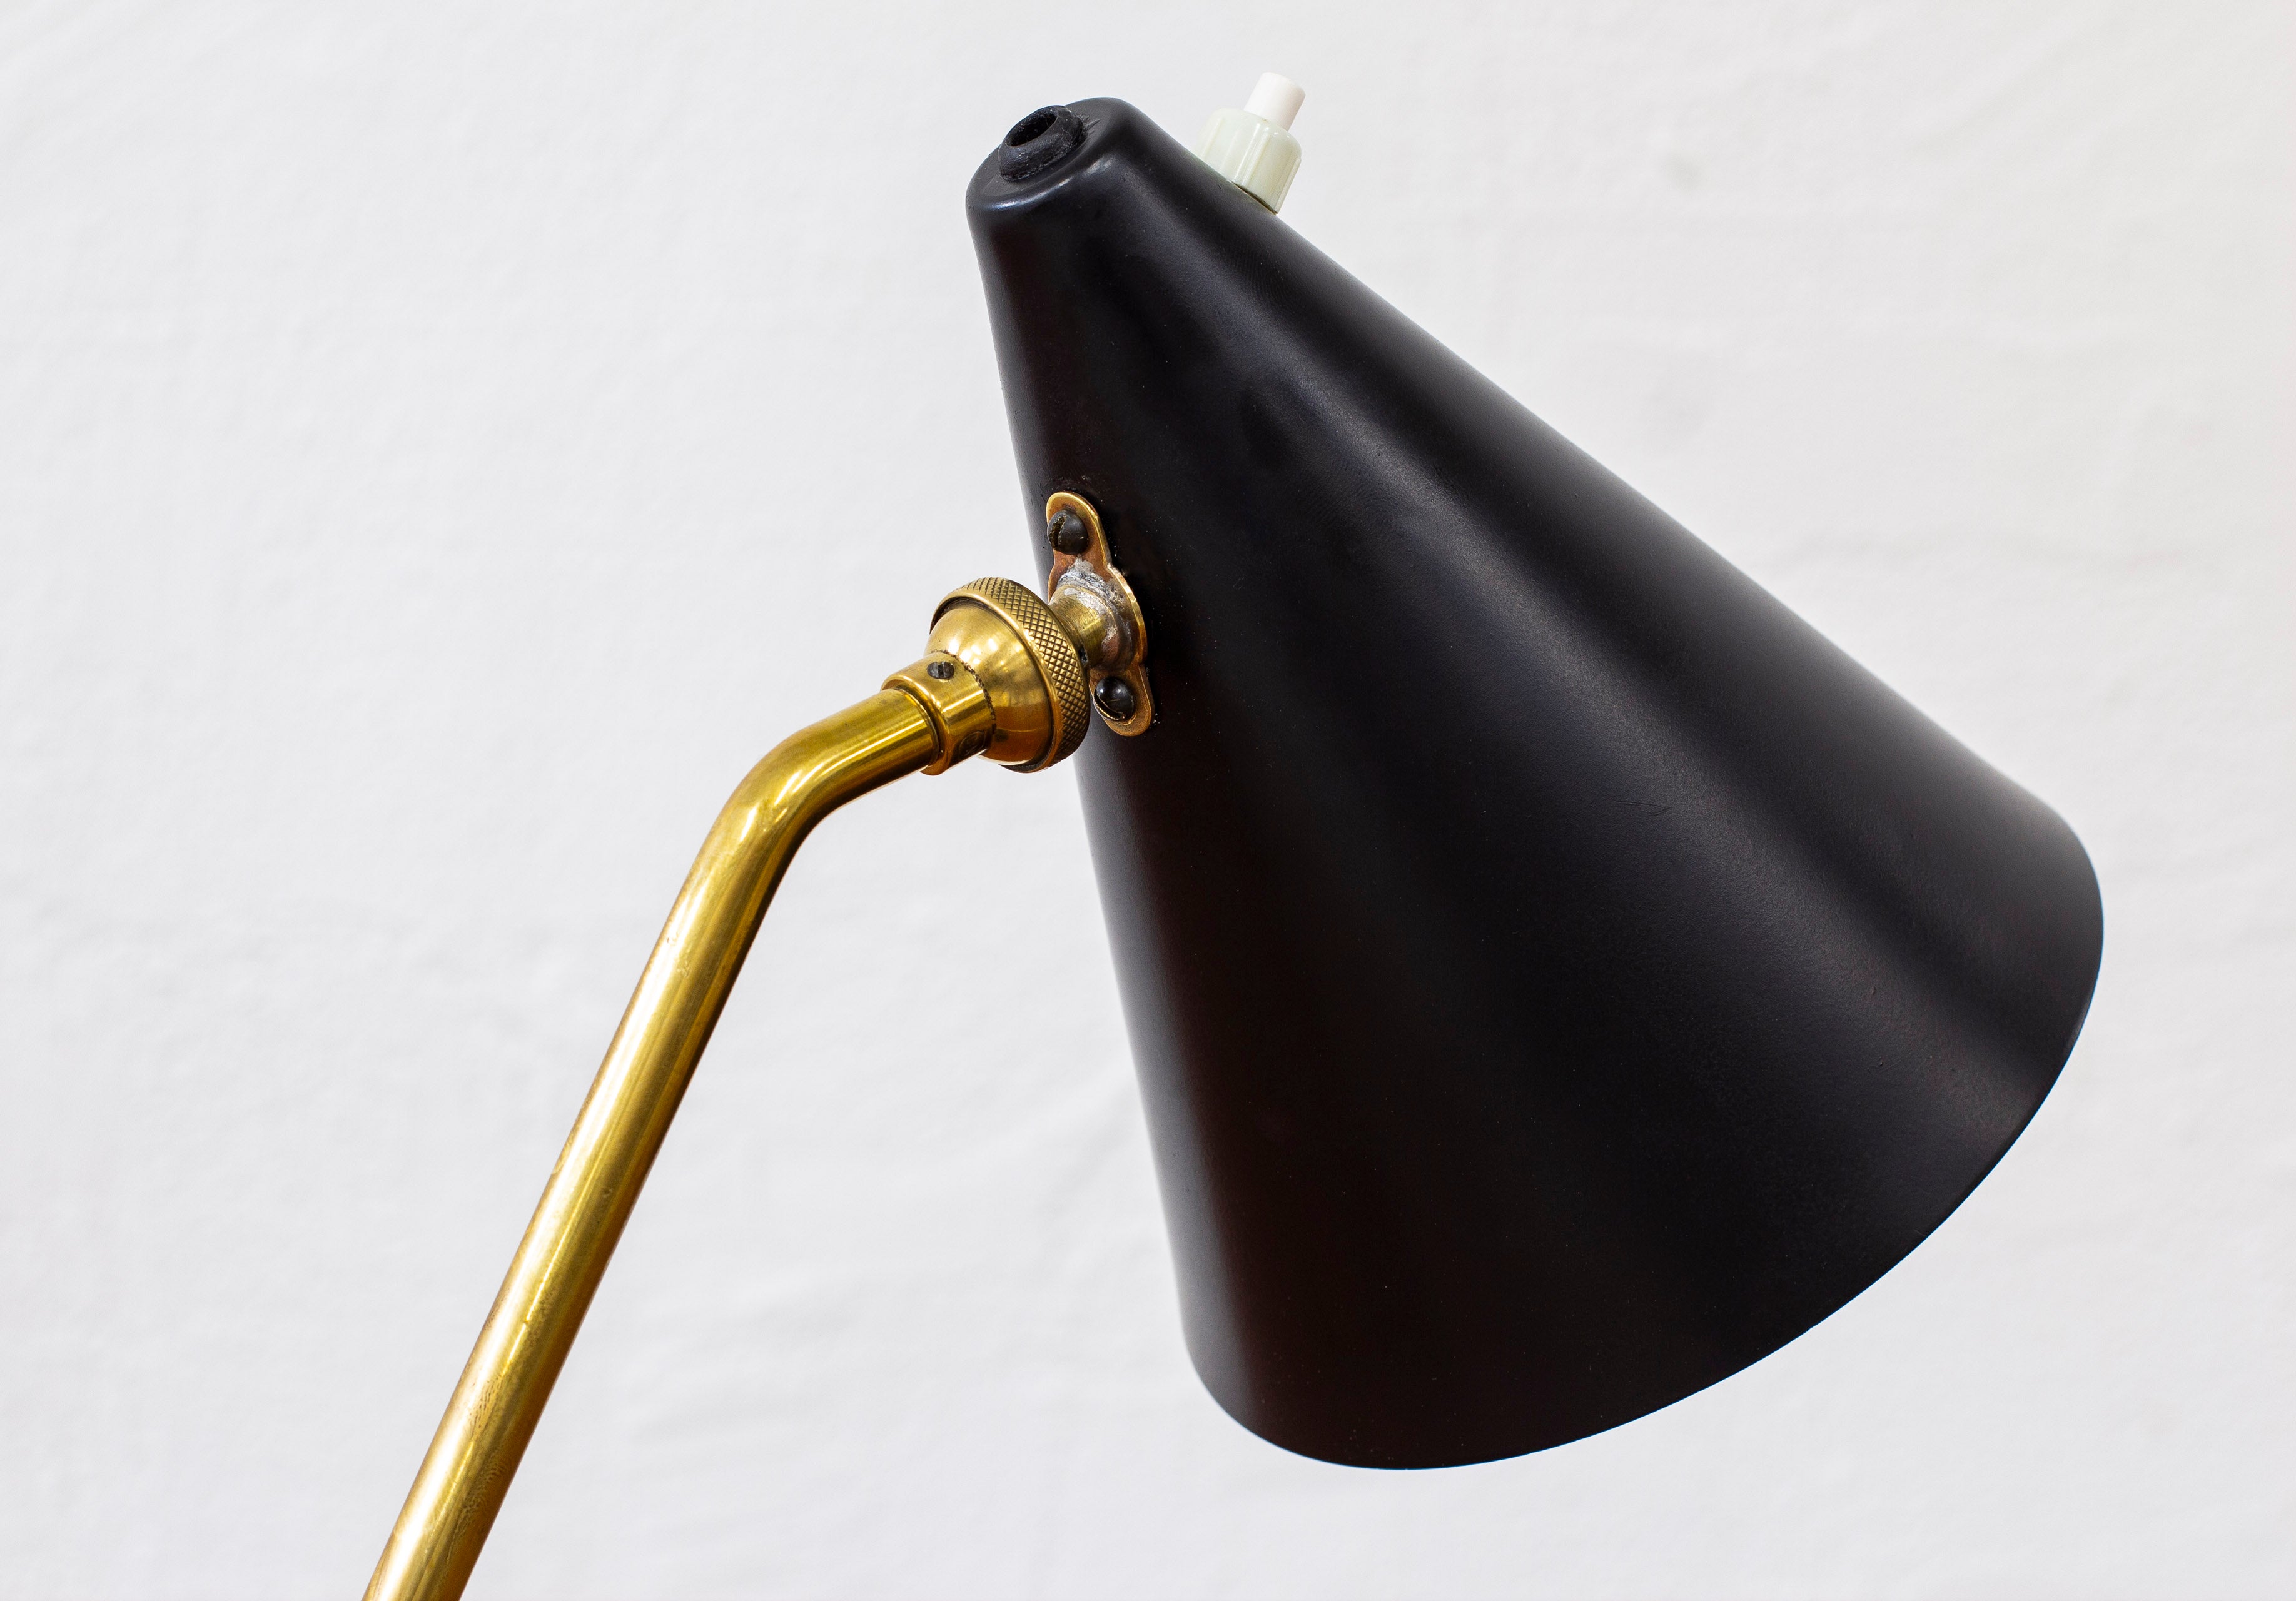 1950s table lamp by Holm Sørensen